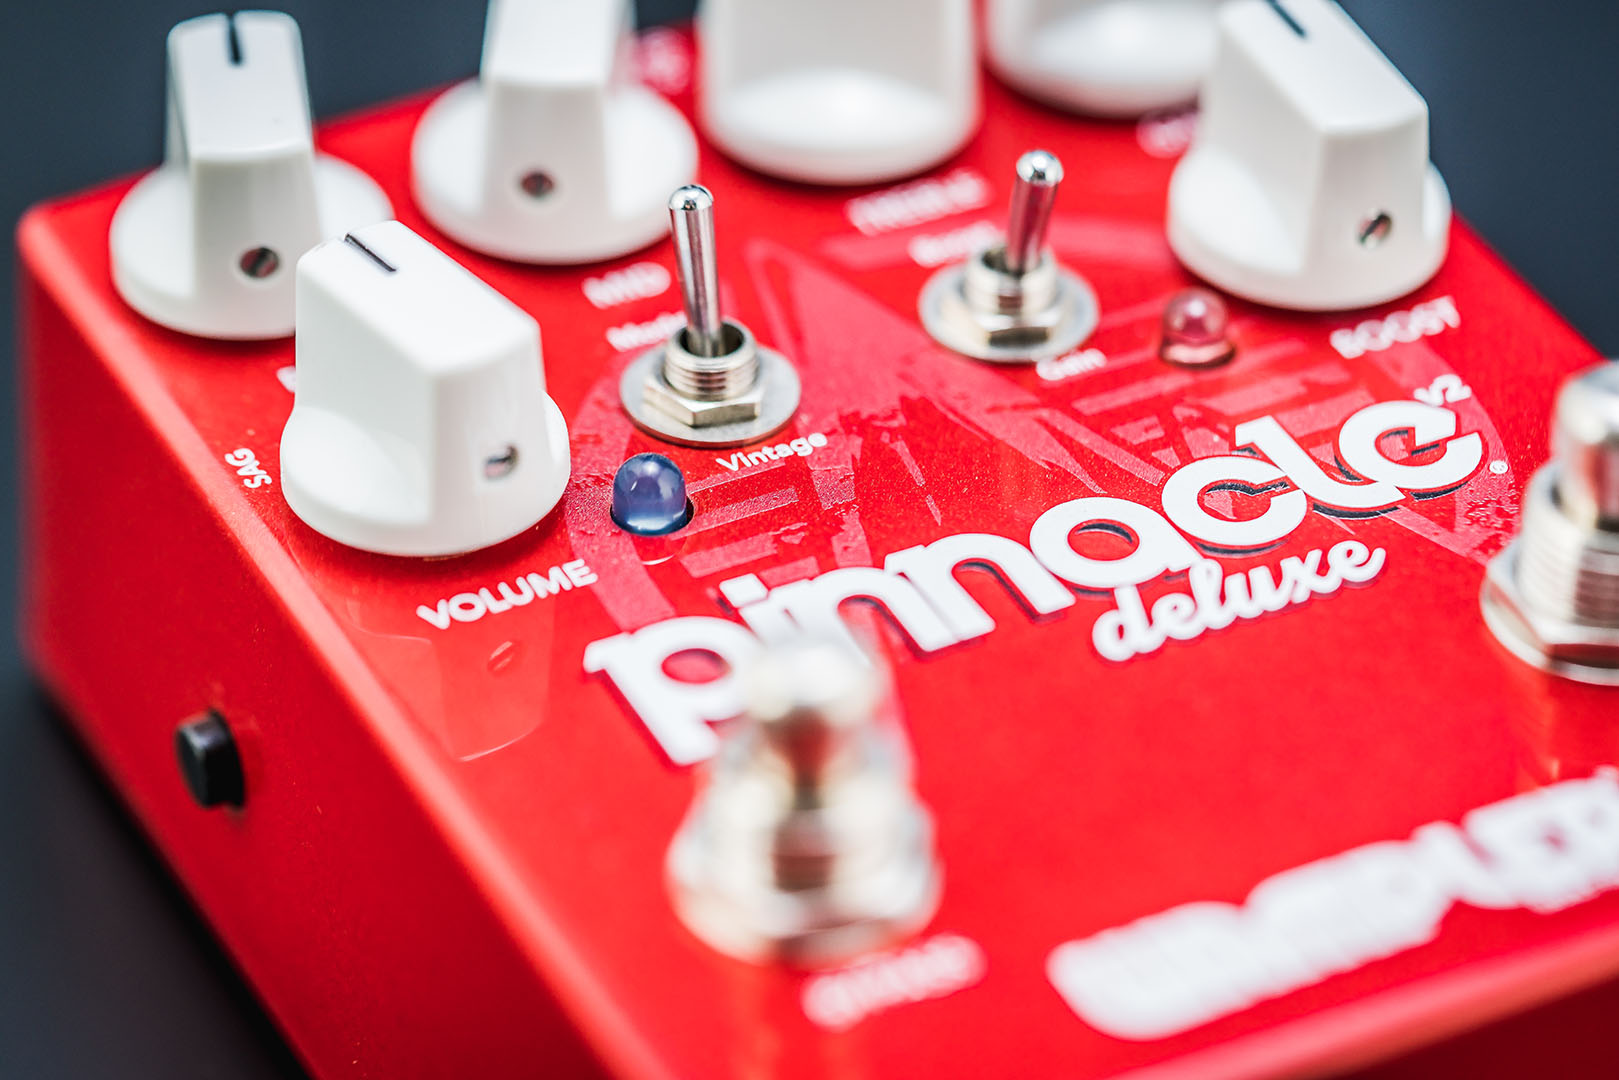 Pinnacle Deluxe v2 Pedal